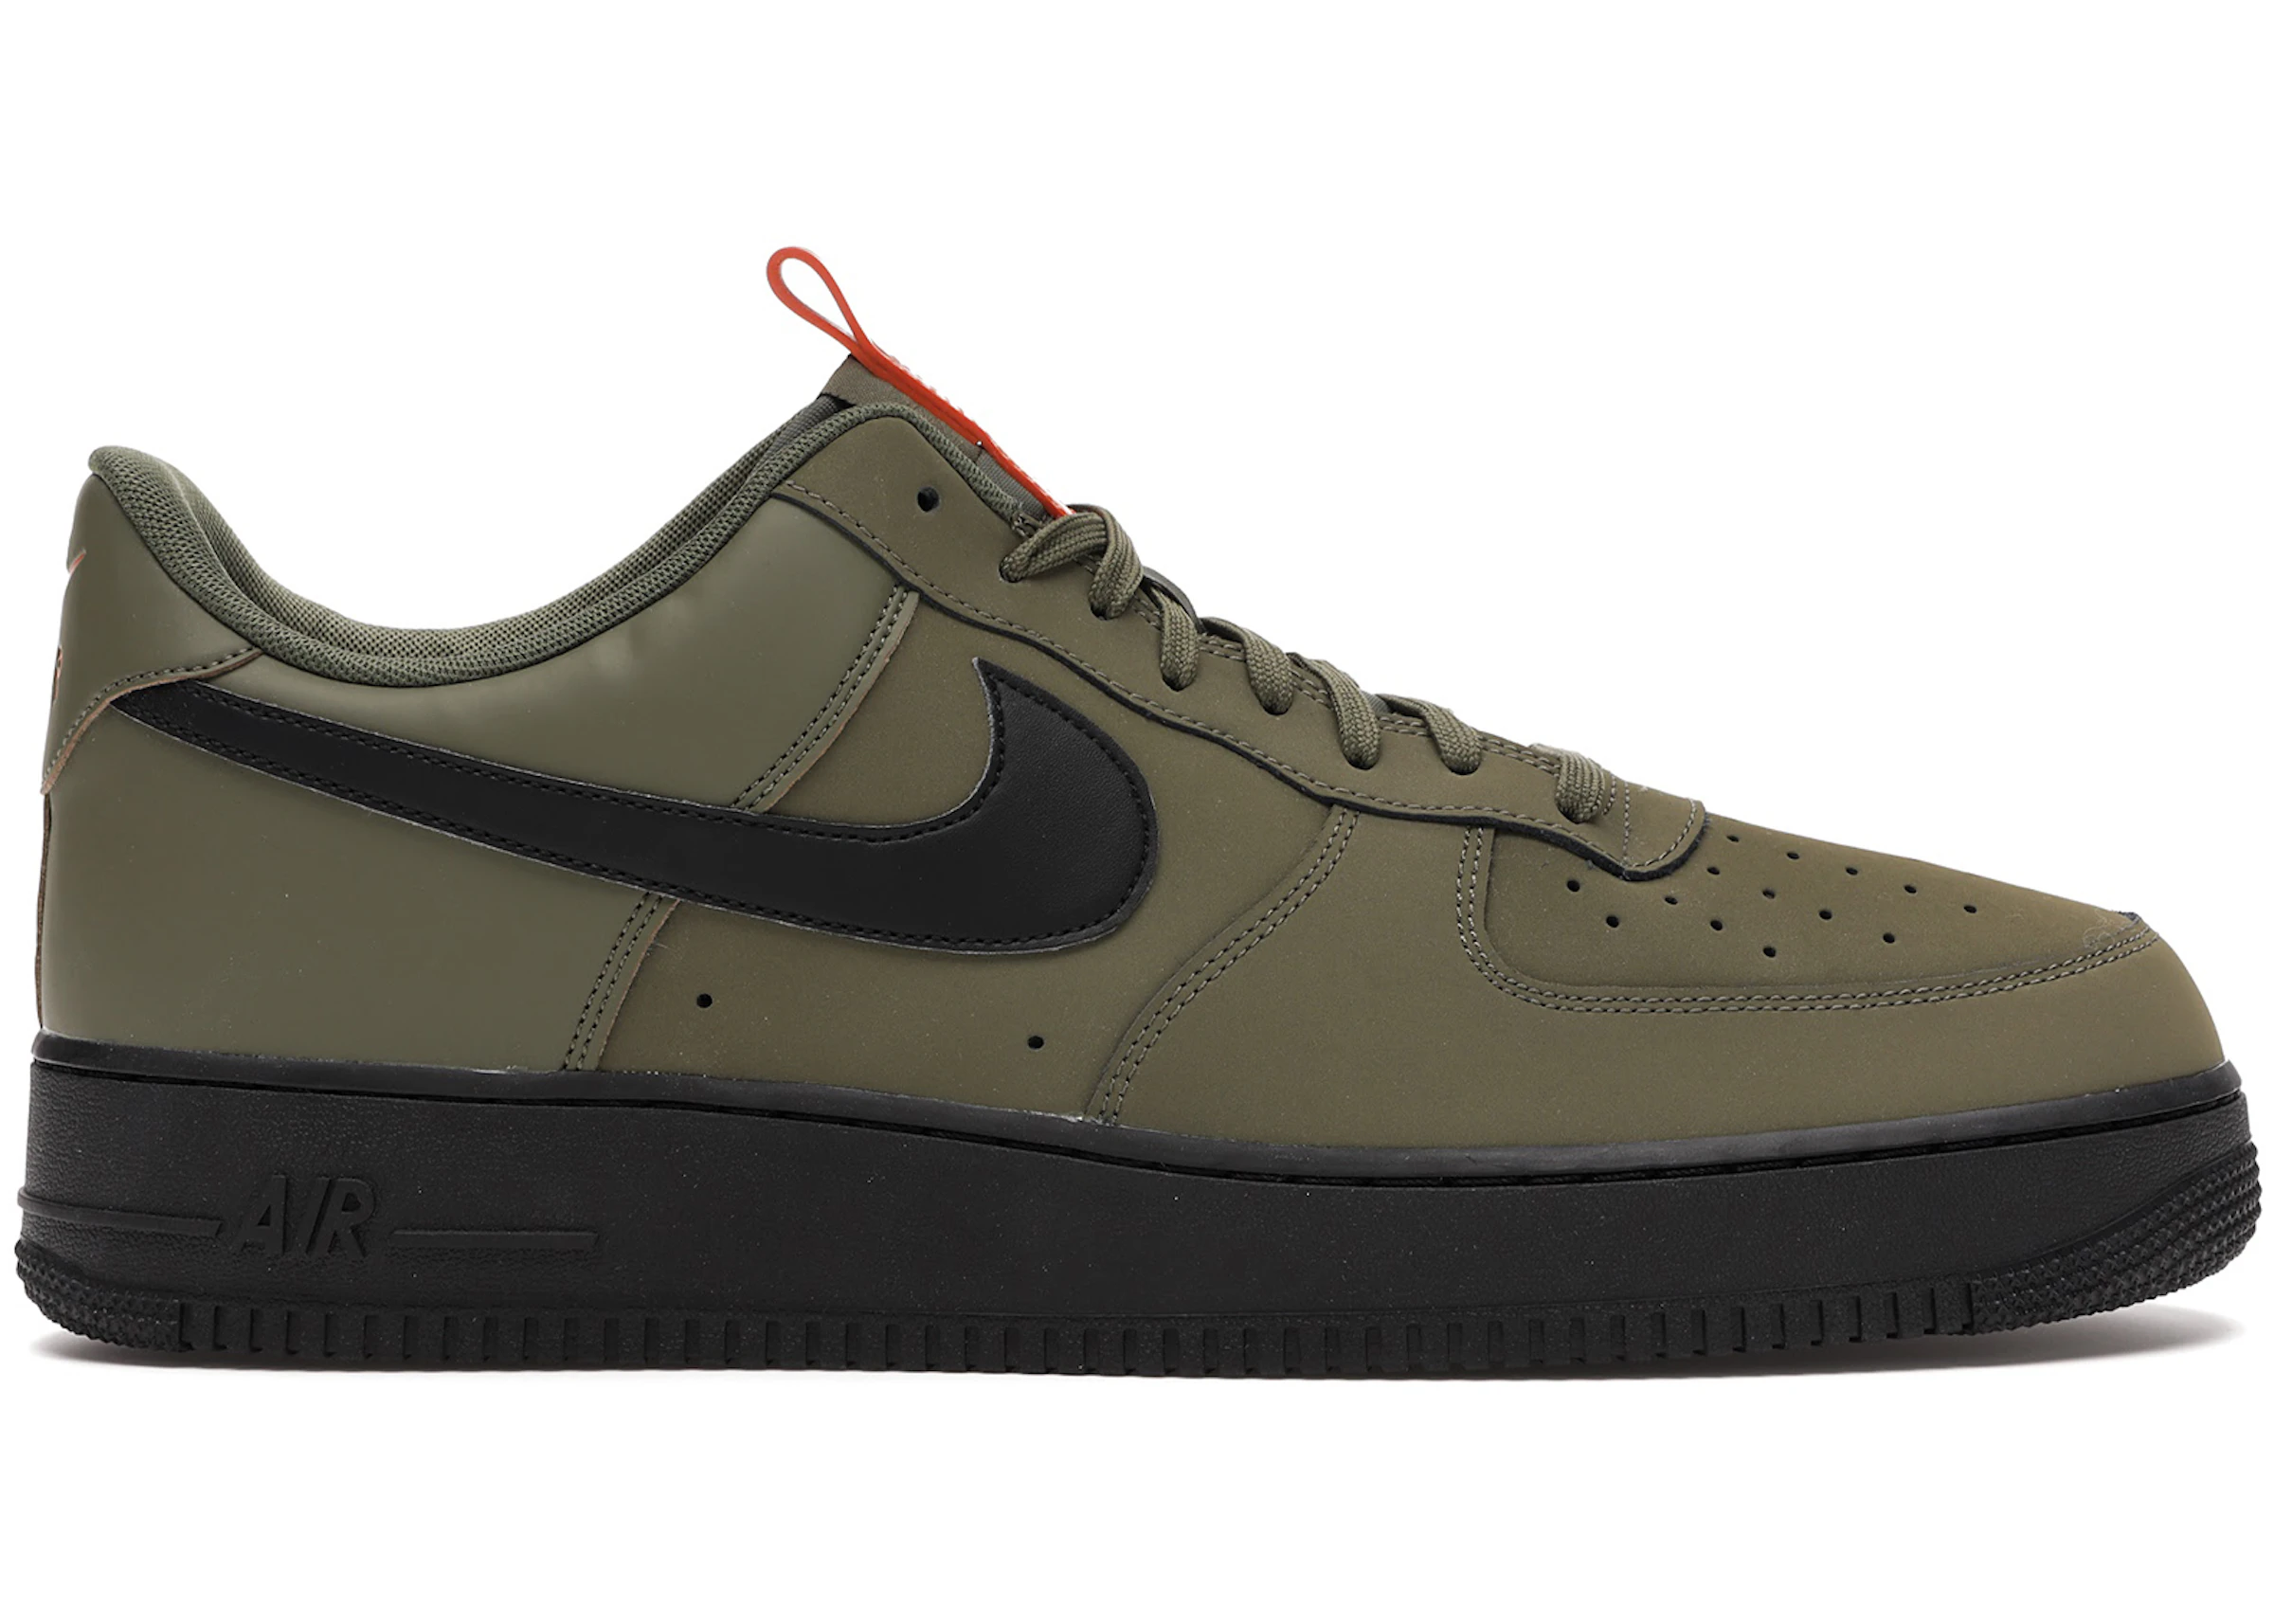 Inflates Plasticity microphone Nike Air Force 1 Low Medium Olive - BQ4326-200 - US